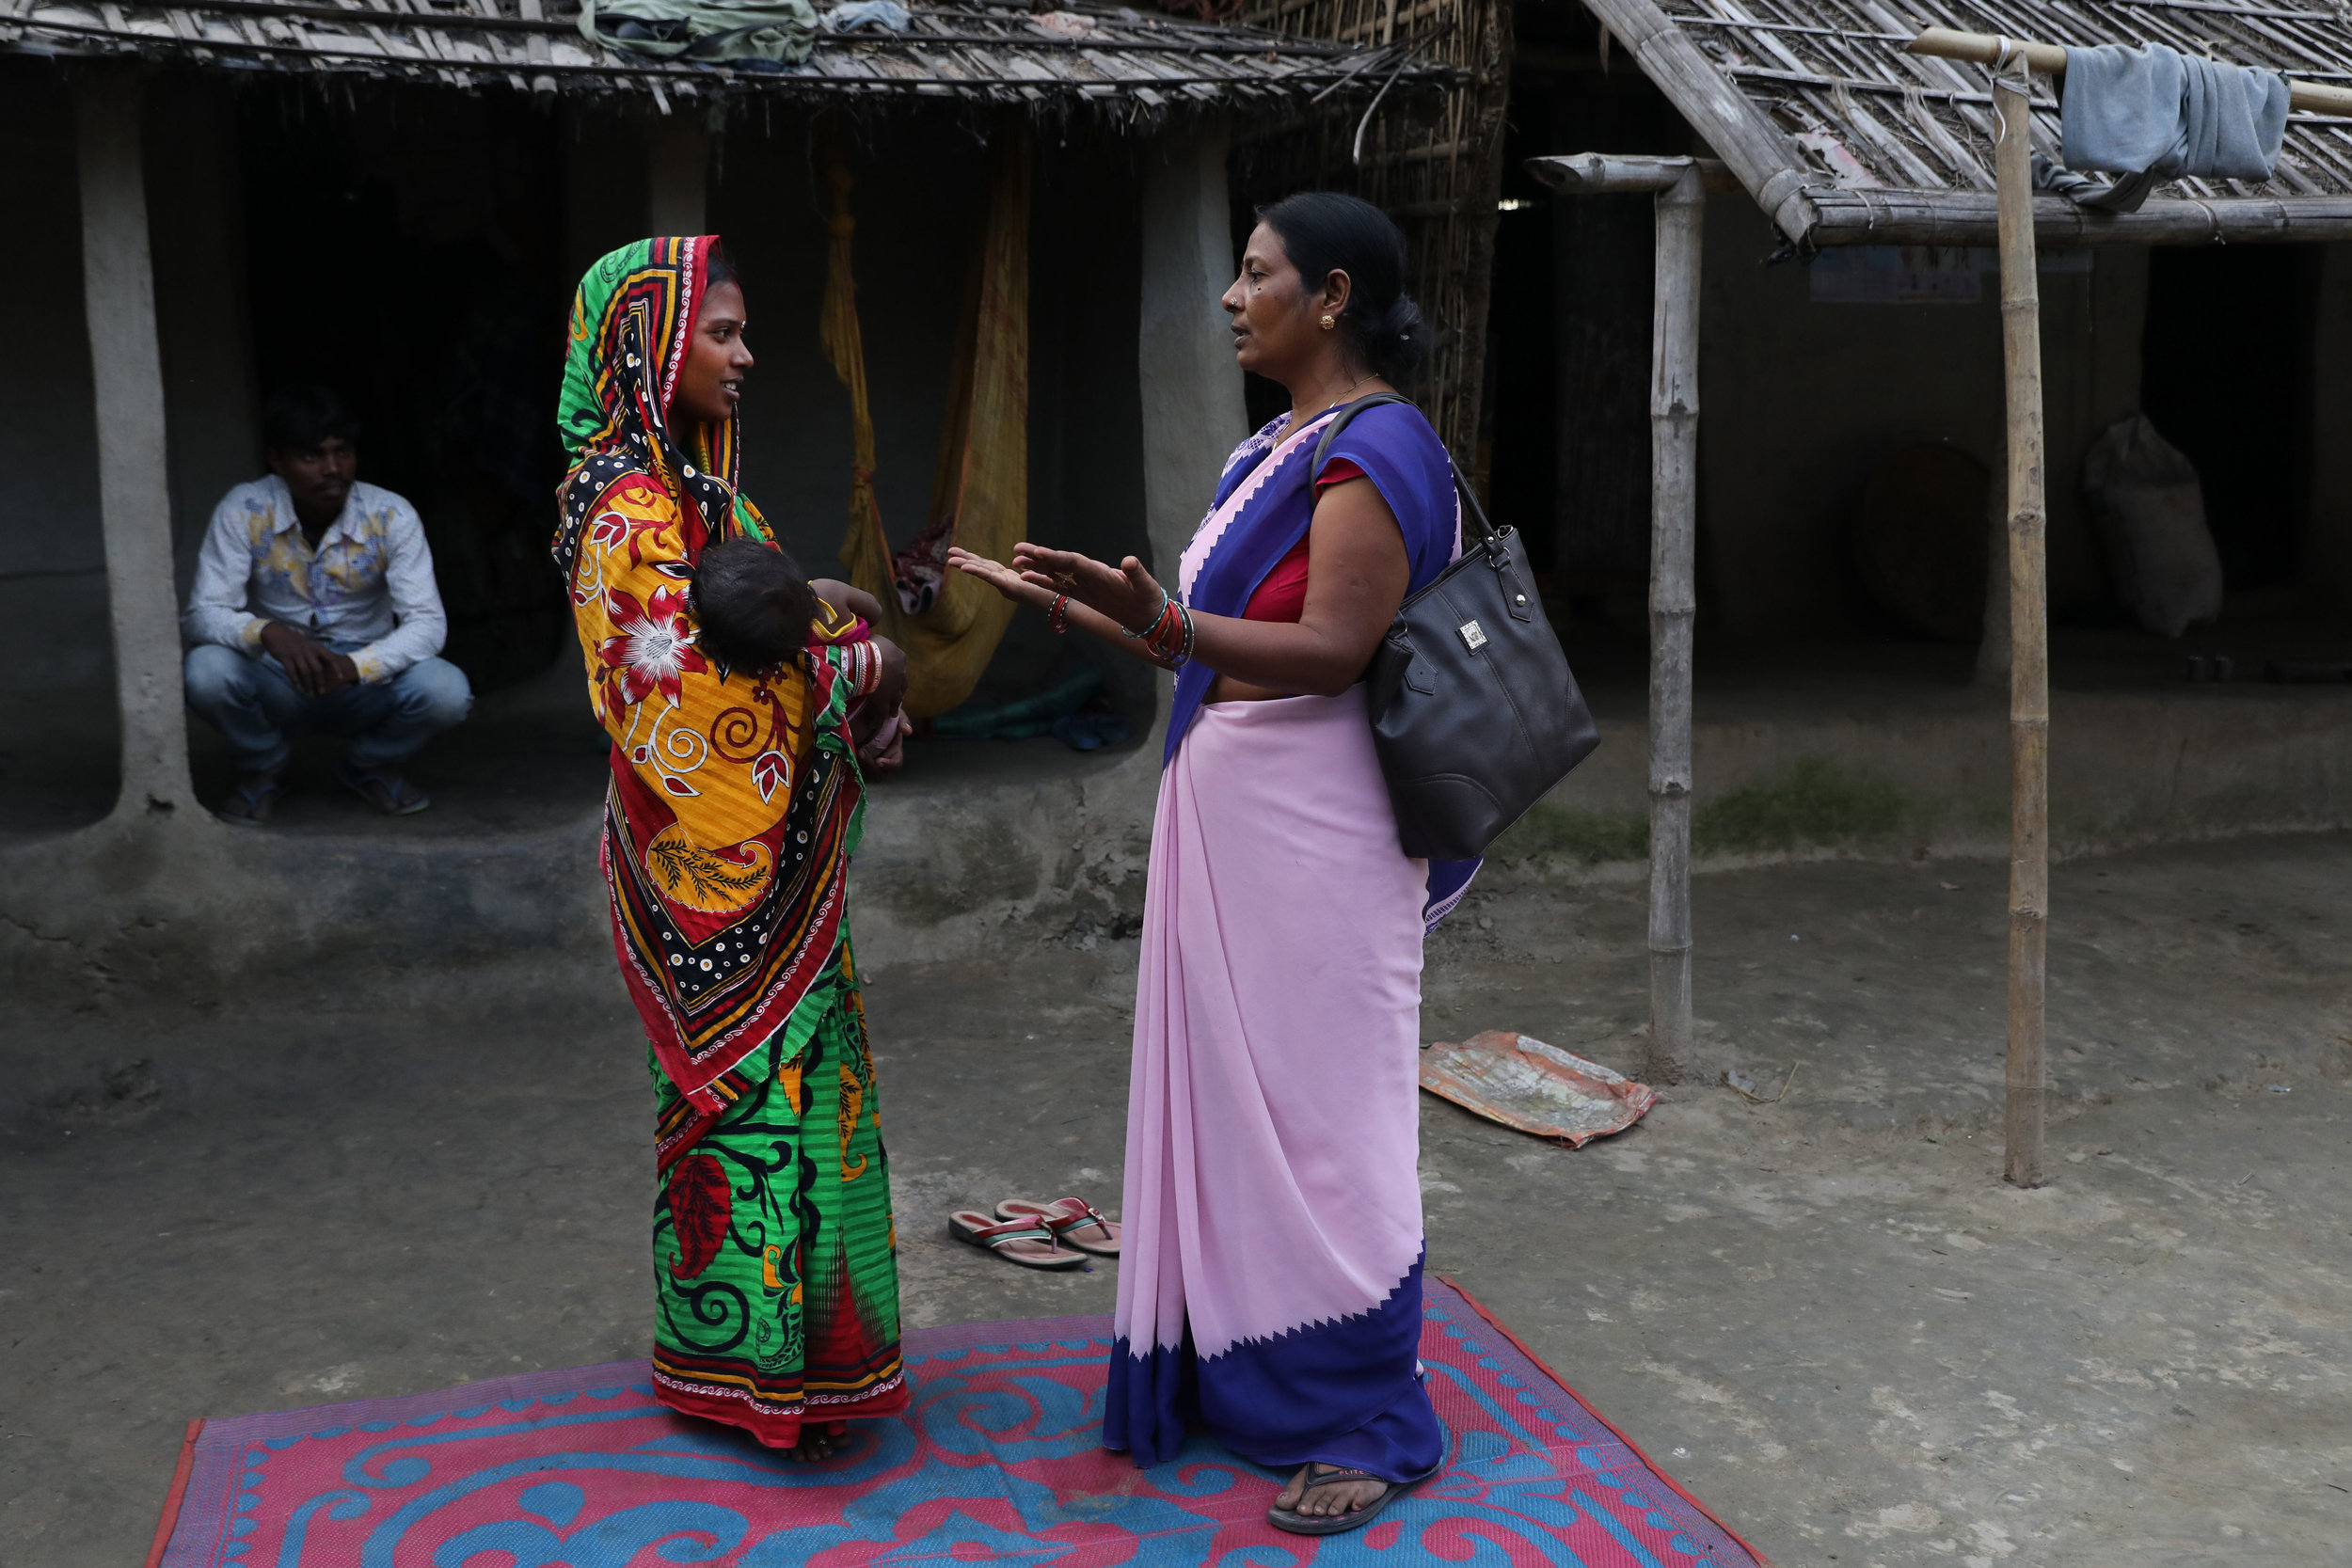 An Accredited Social Health Activist (ASHA) interacts with a young mother during a home visit.